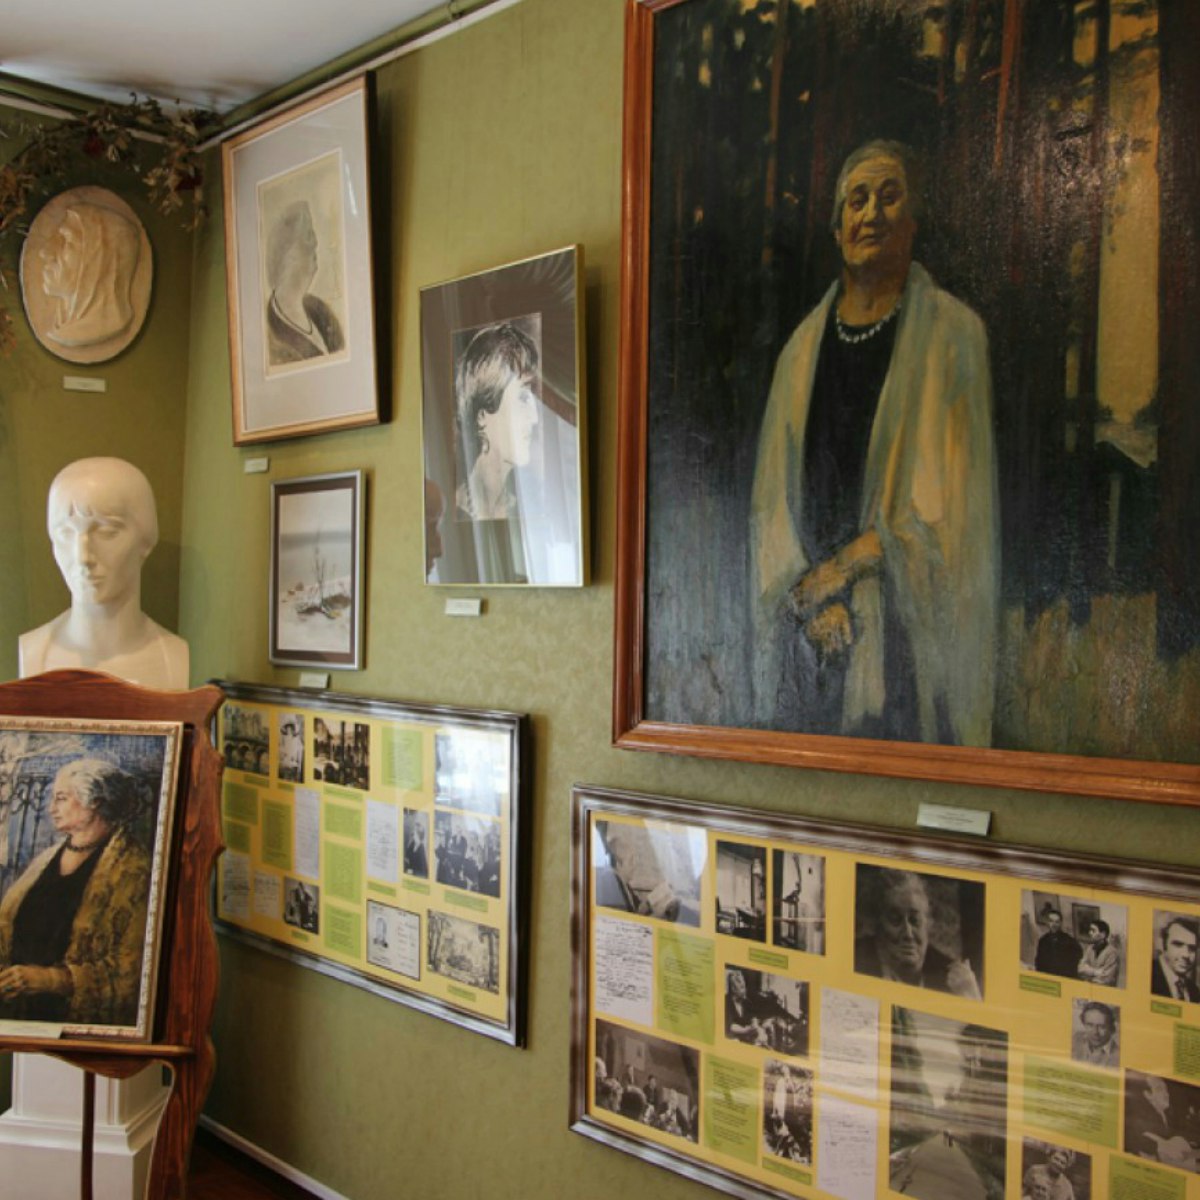 Anna Akhmatova Museum, housed in the south wing of the Sheremetyev Palace.